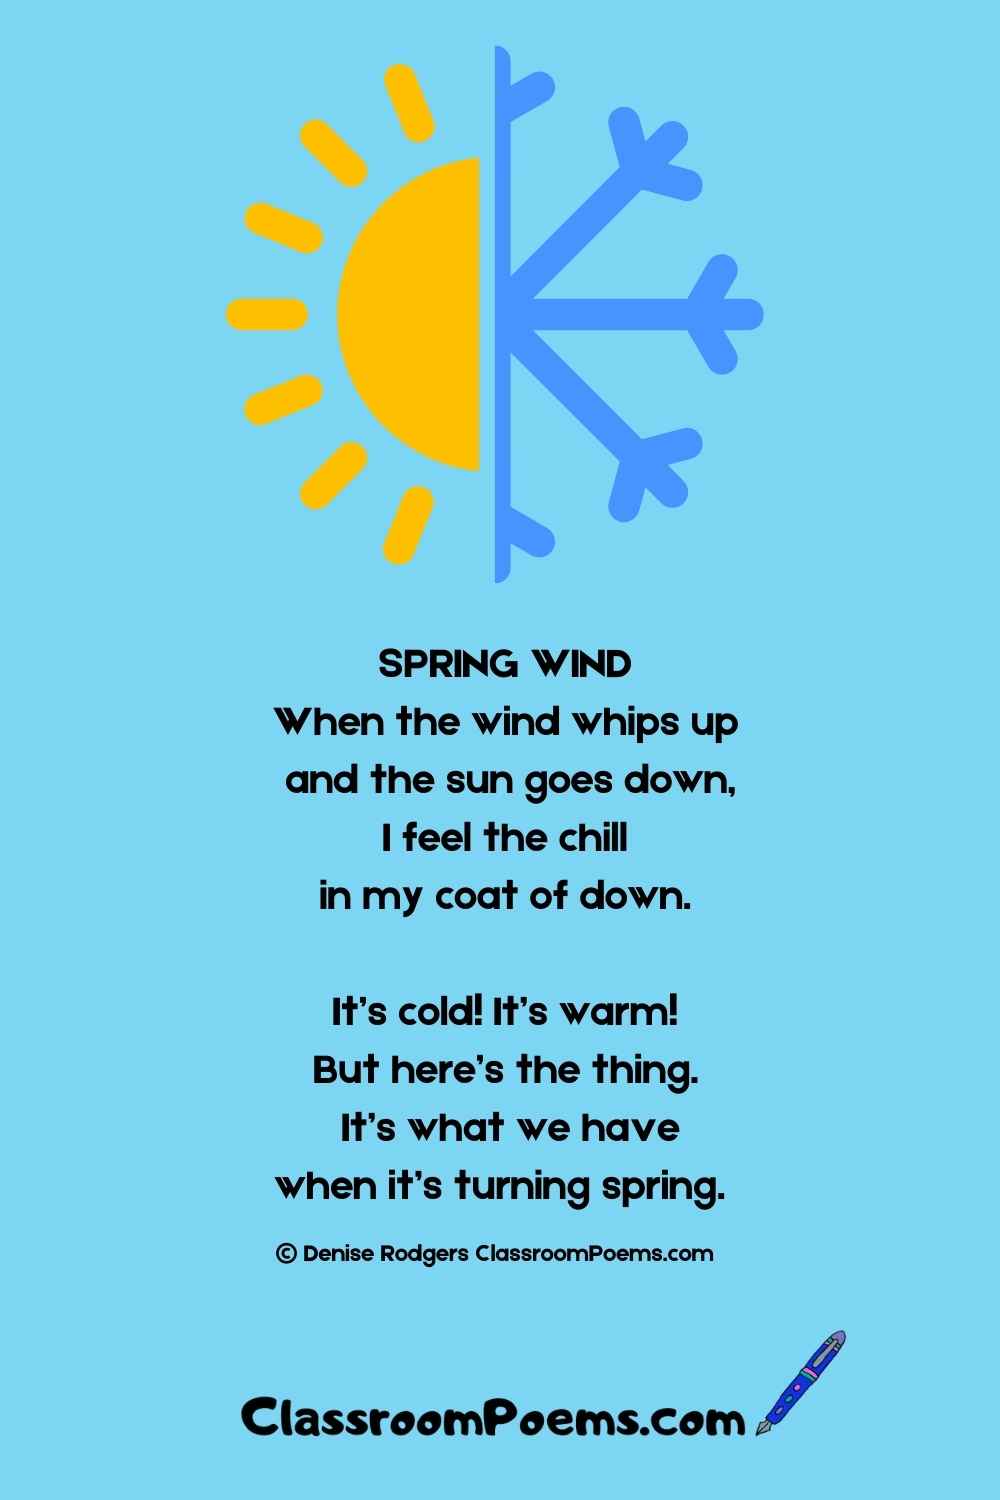 Spring poems by Denise Rodgers on ClassroomPoems.com.